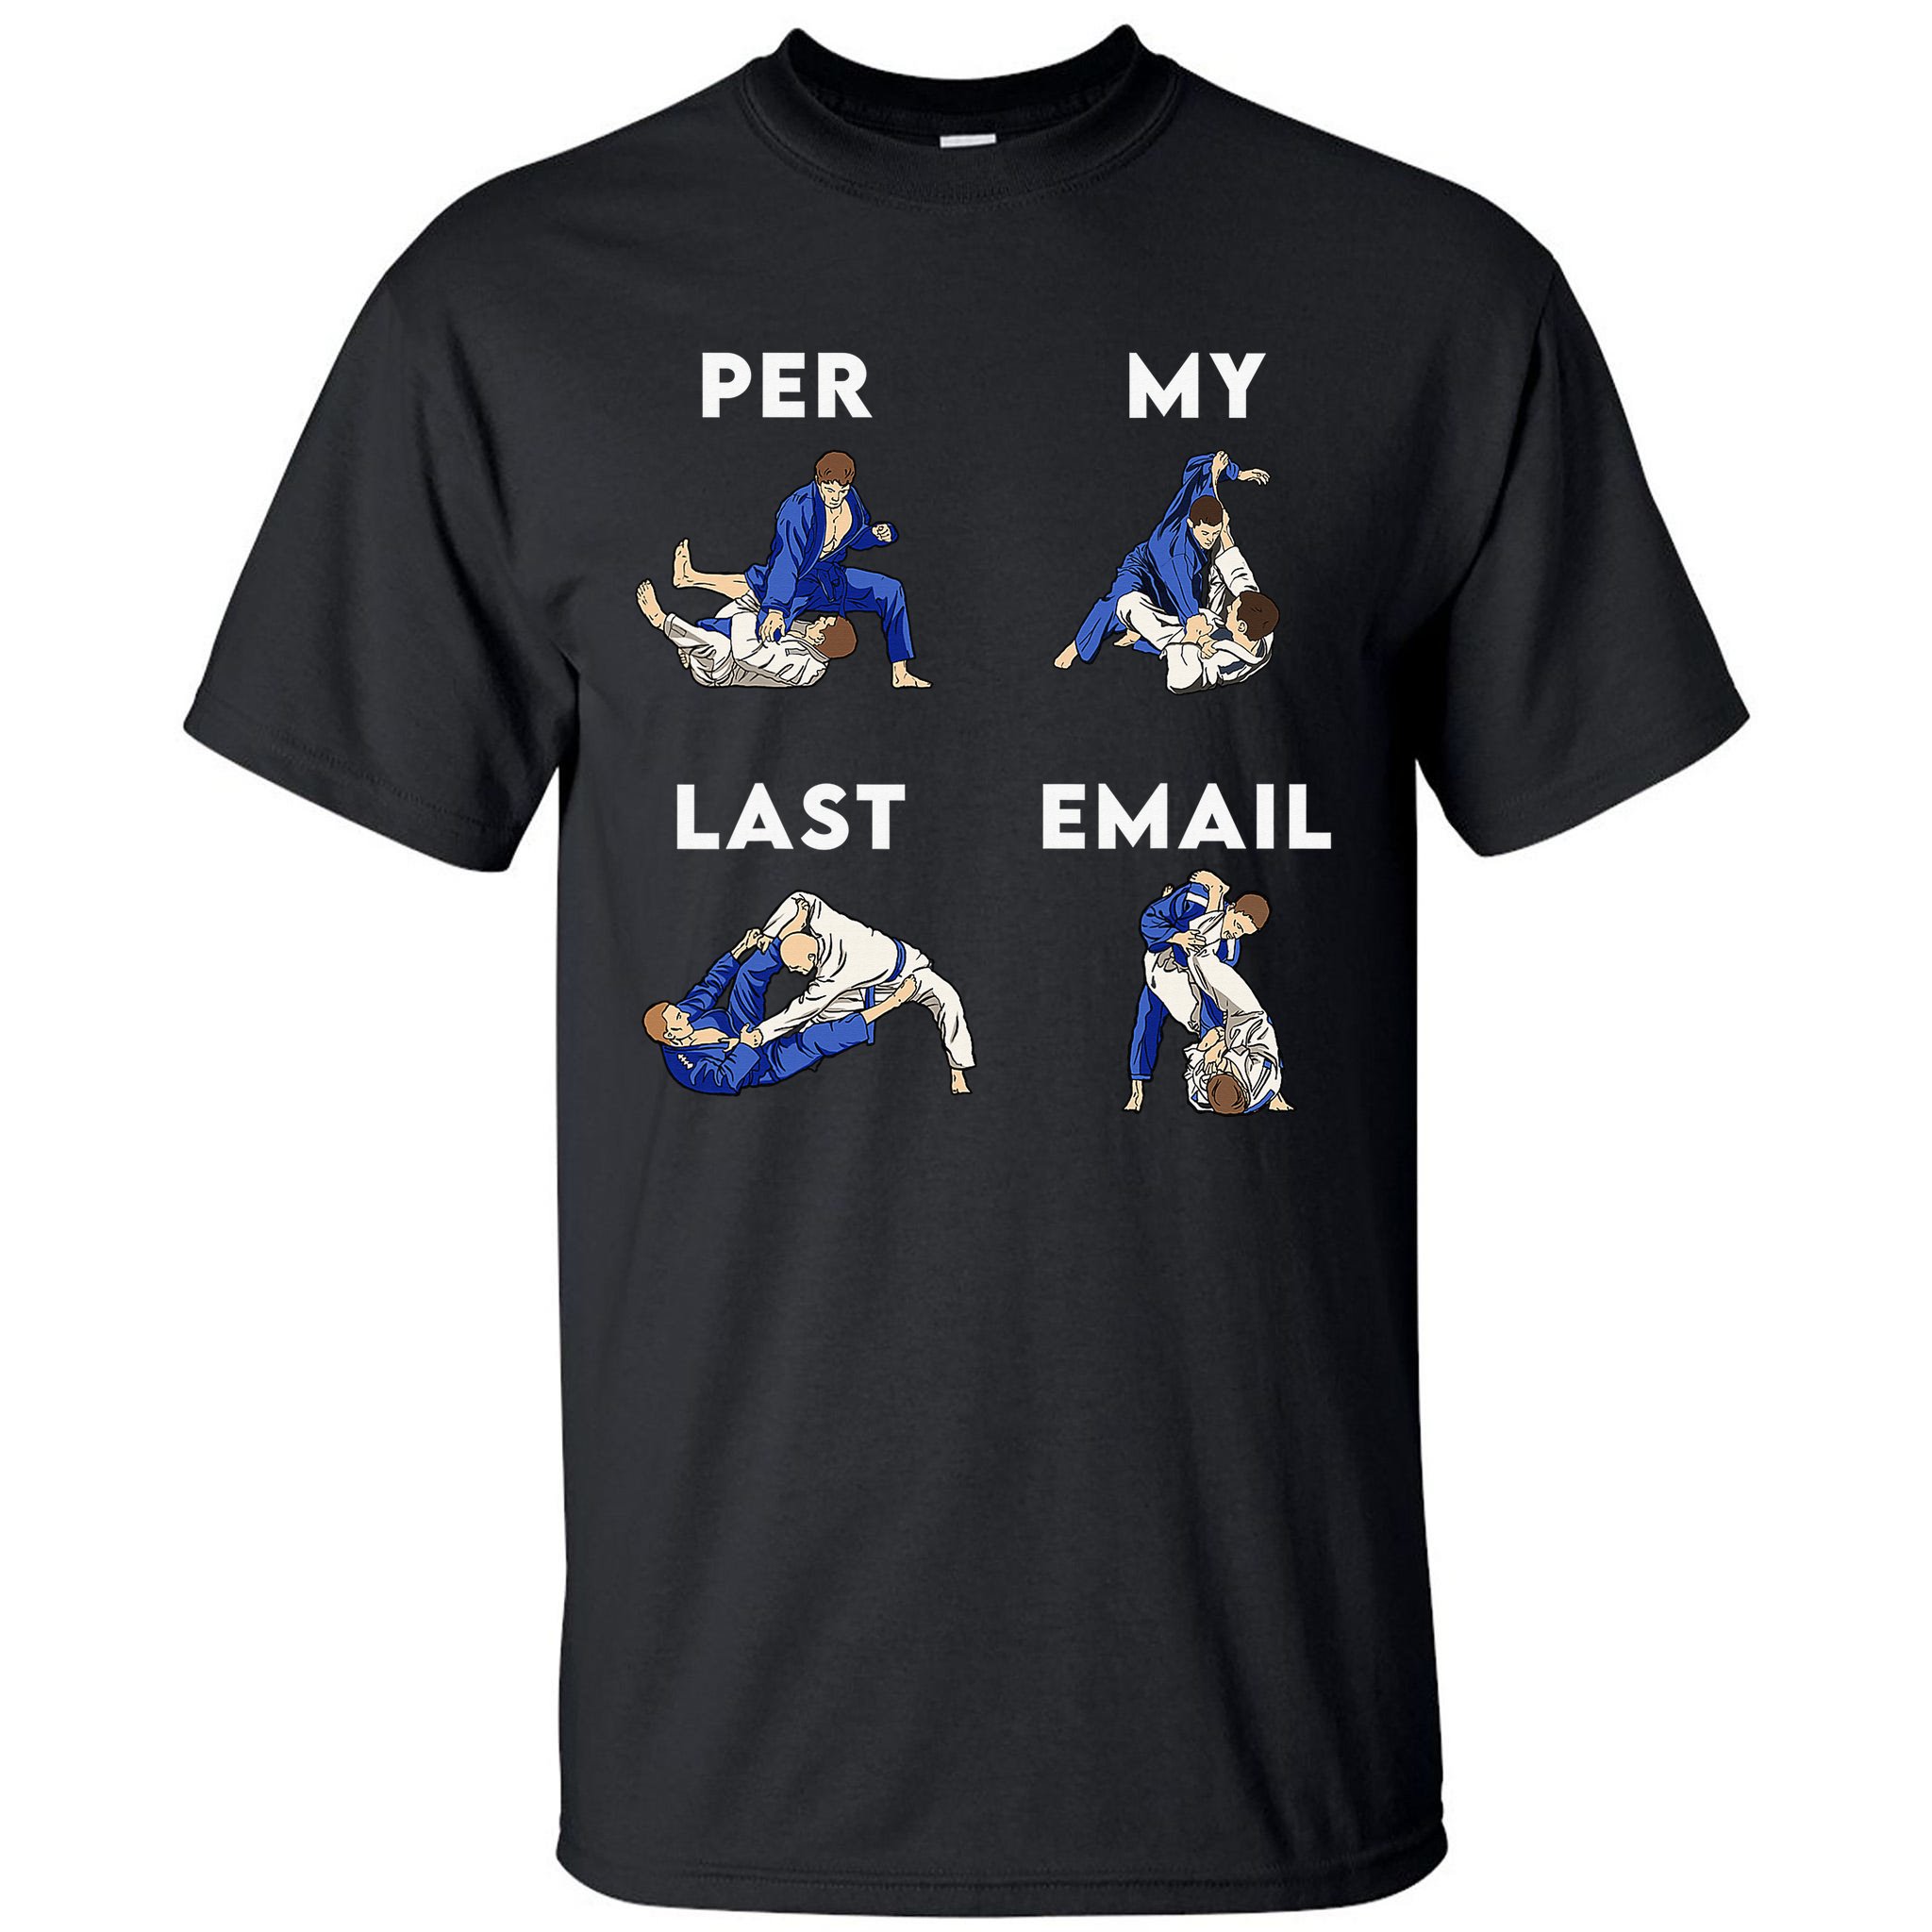 https://images3.teeshirtpalace.com/images/productImages/pml2412175-per-my-last-email-office-humor-meme-fight-punch-boxing--black-att-garment.jpg